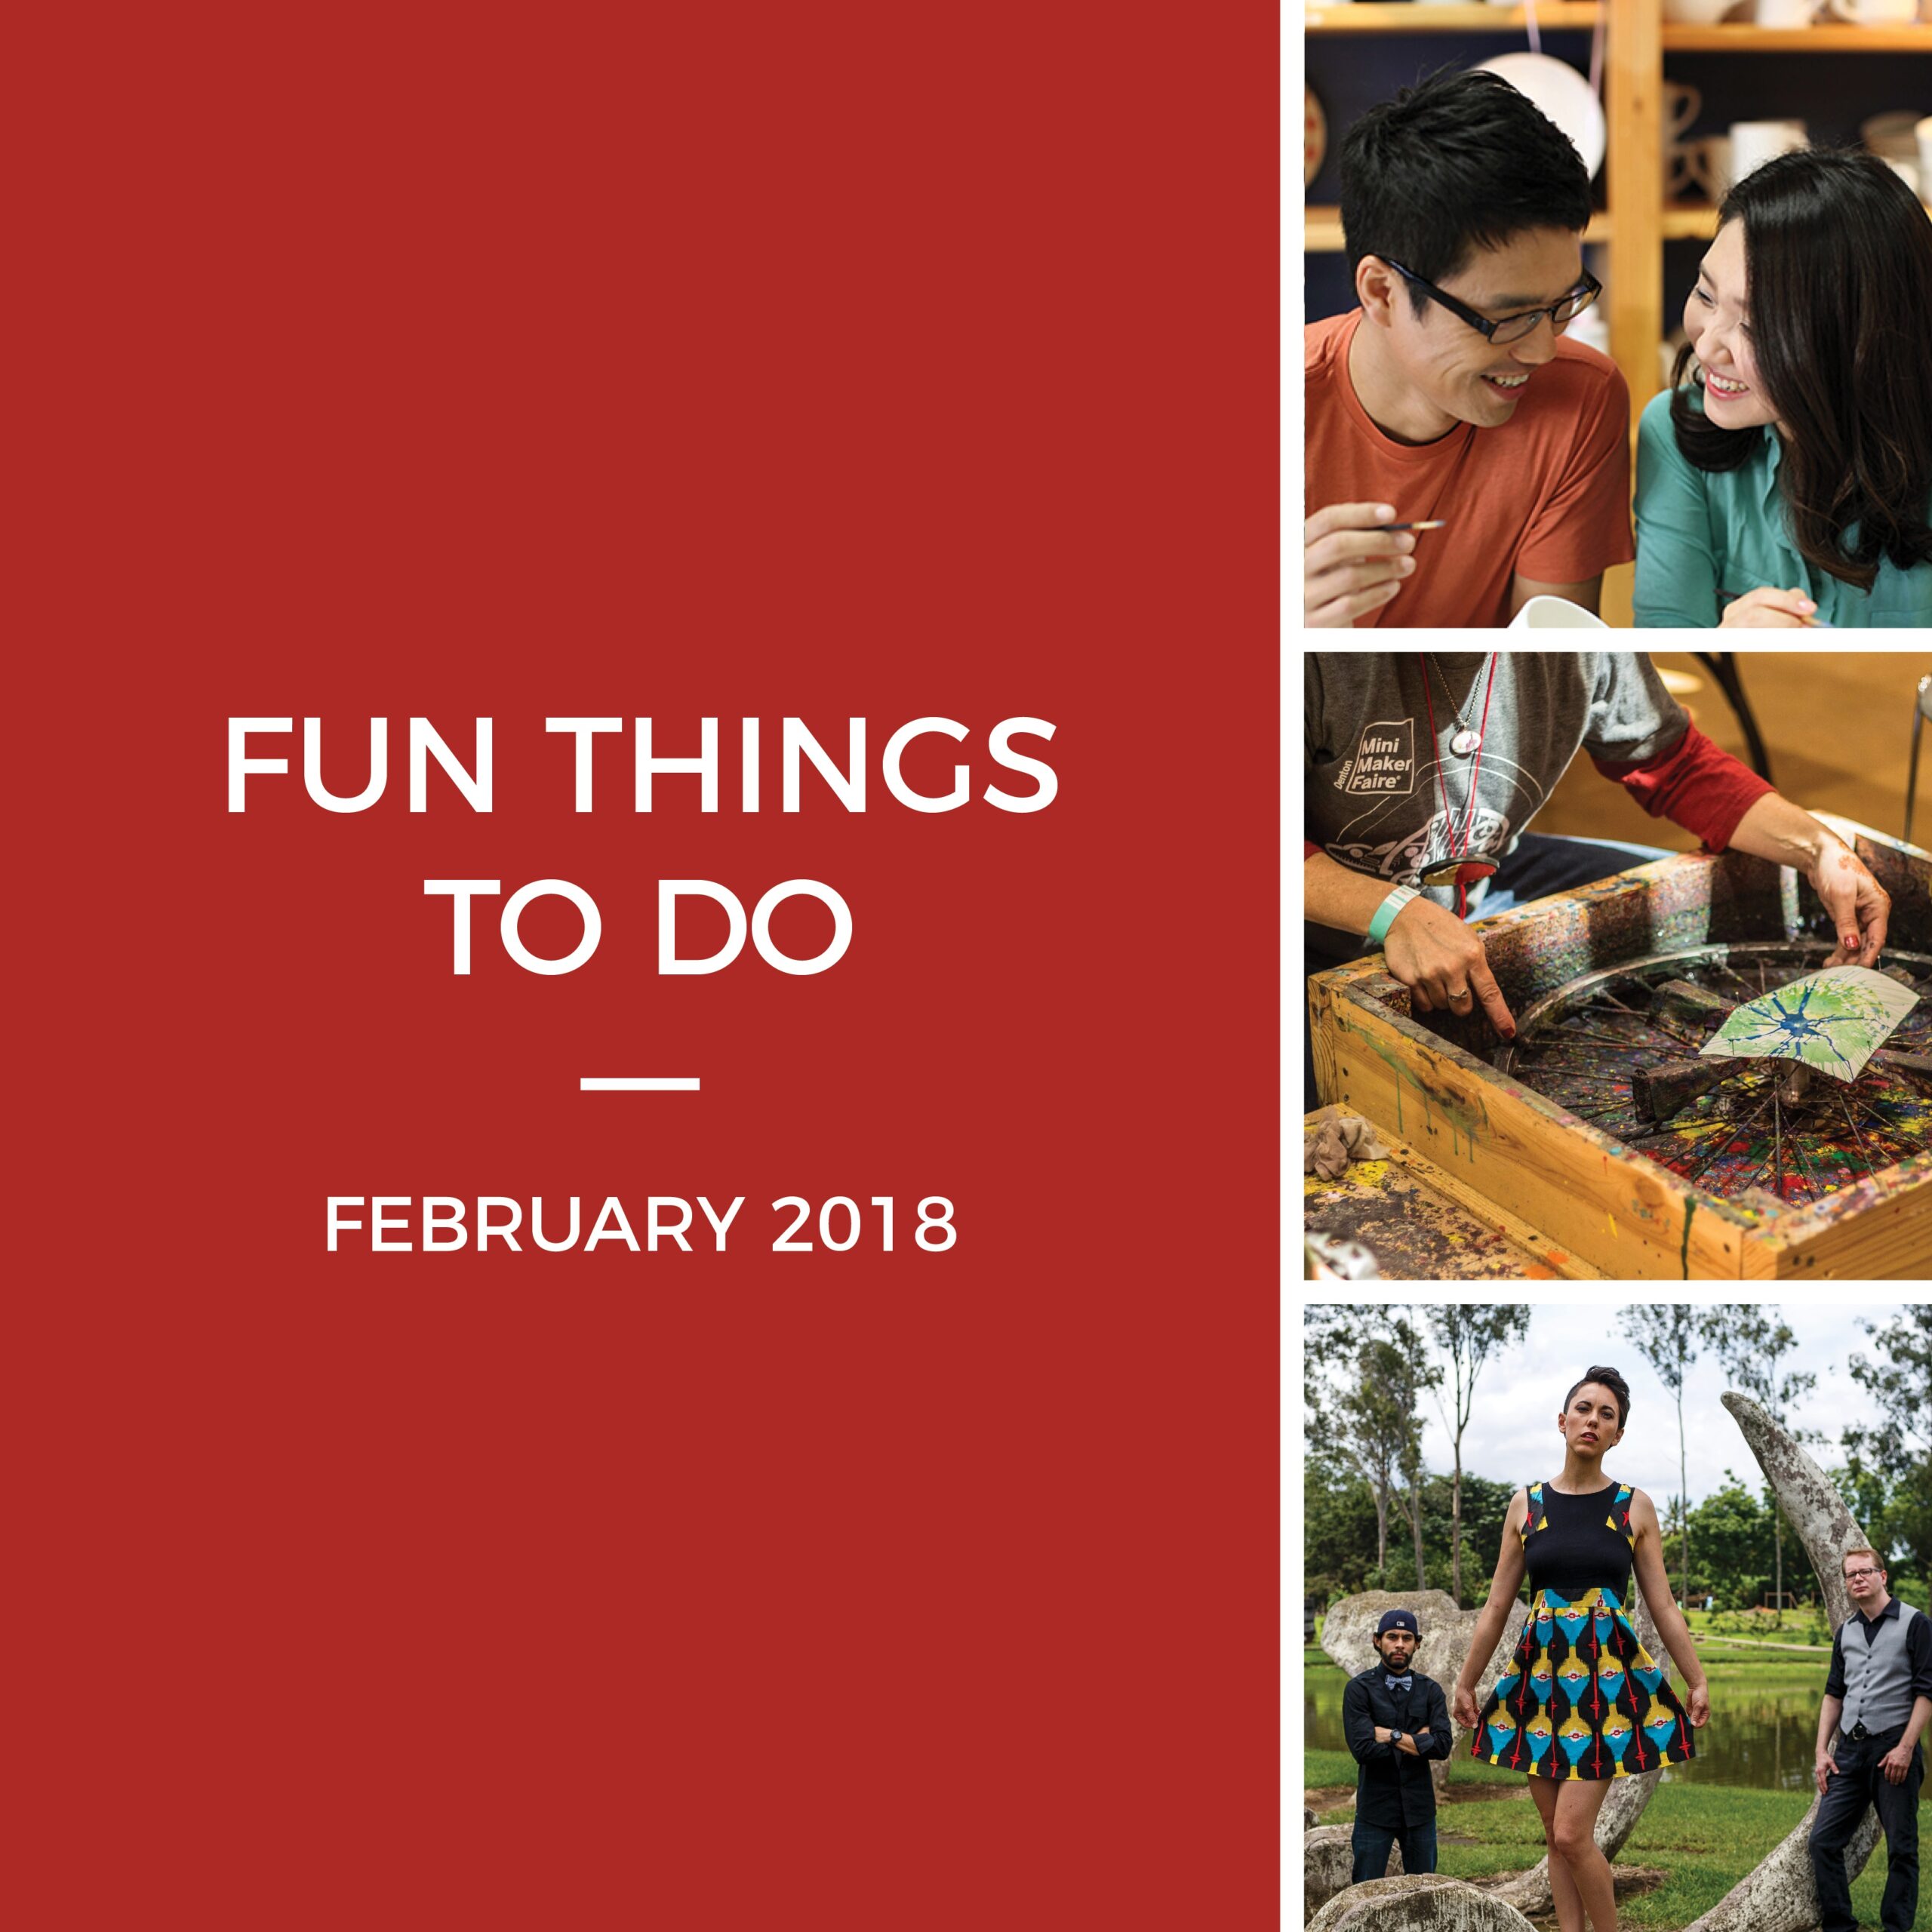 Fun Things to Do in the Month of Love (February)!